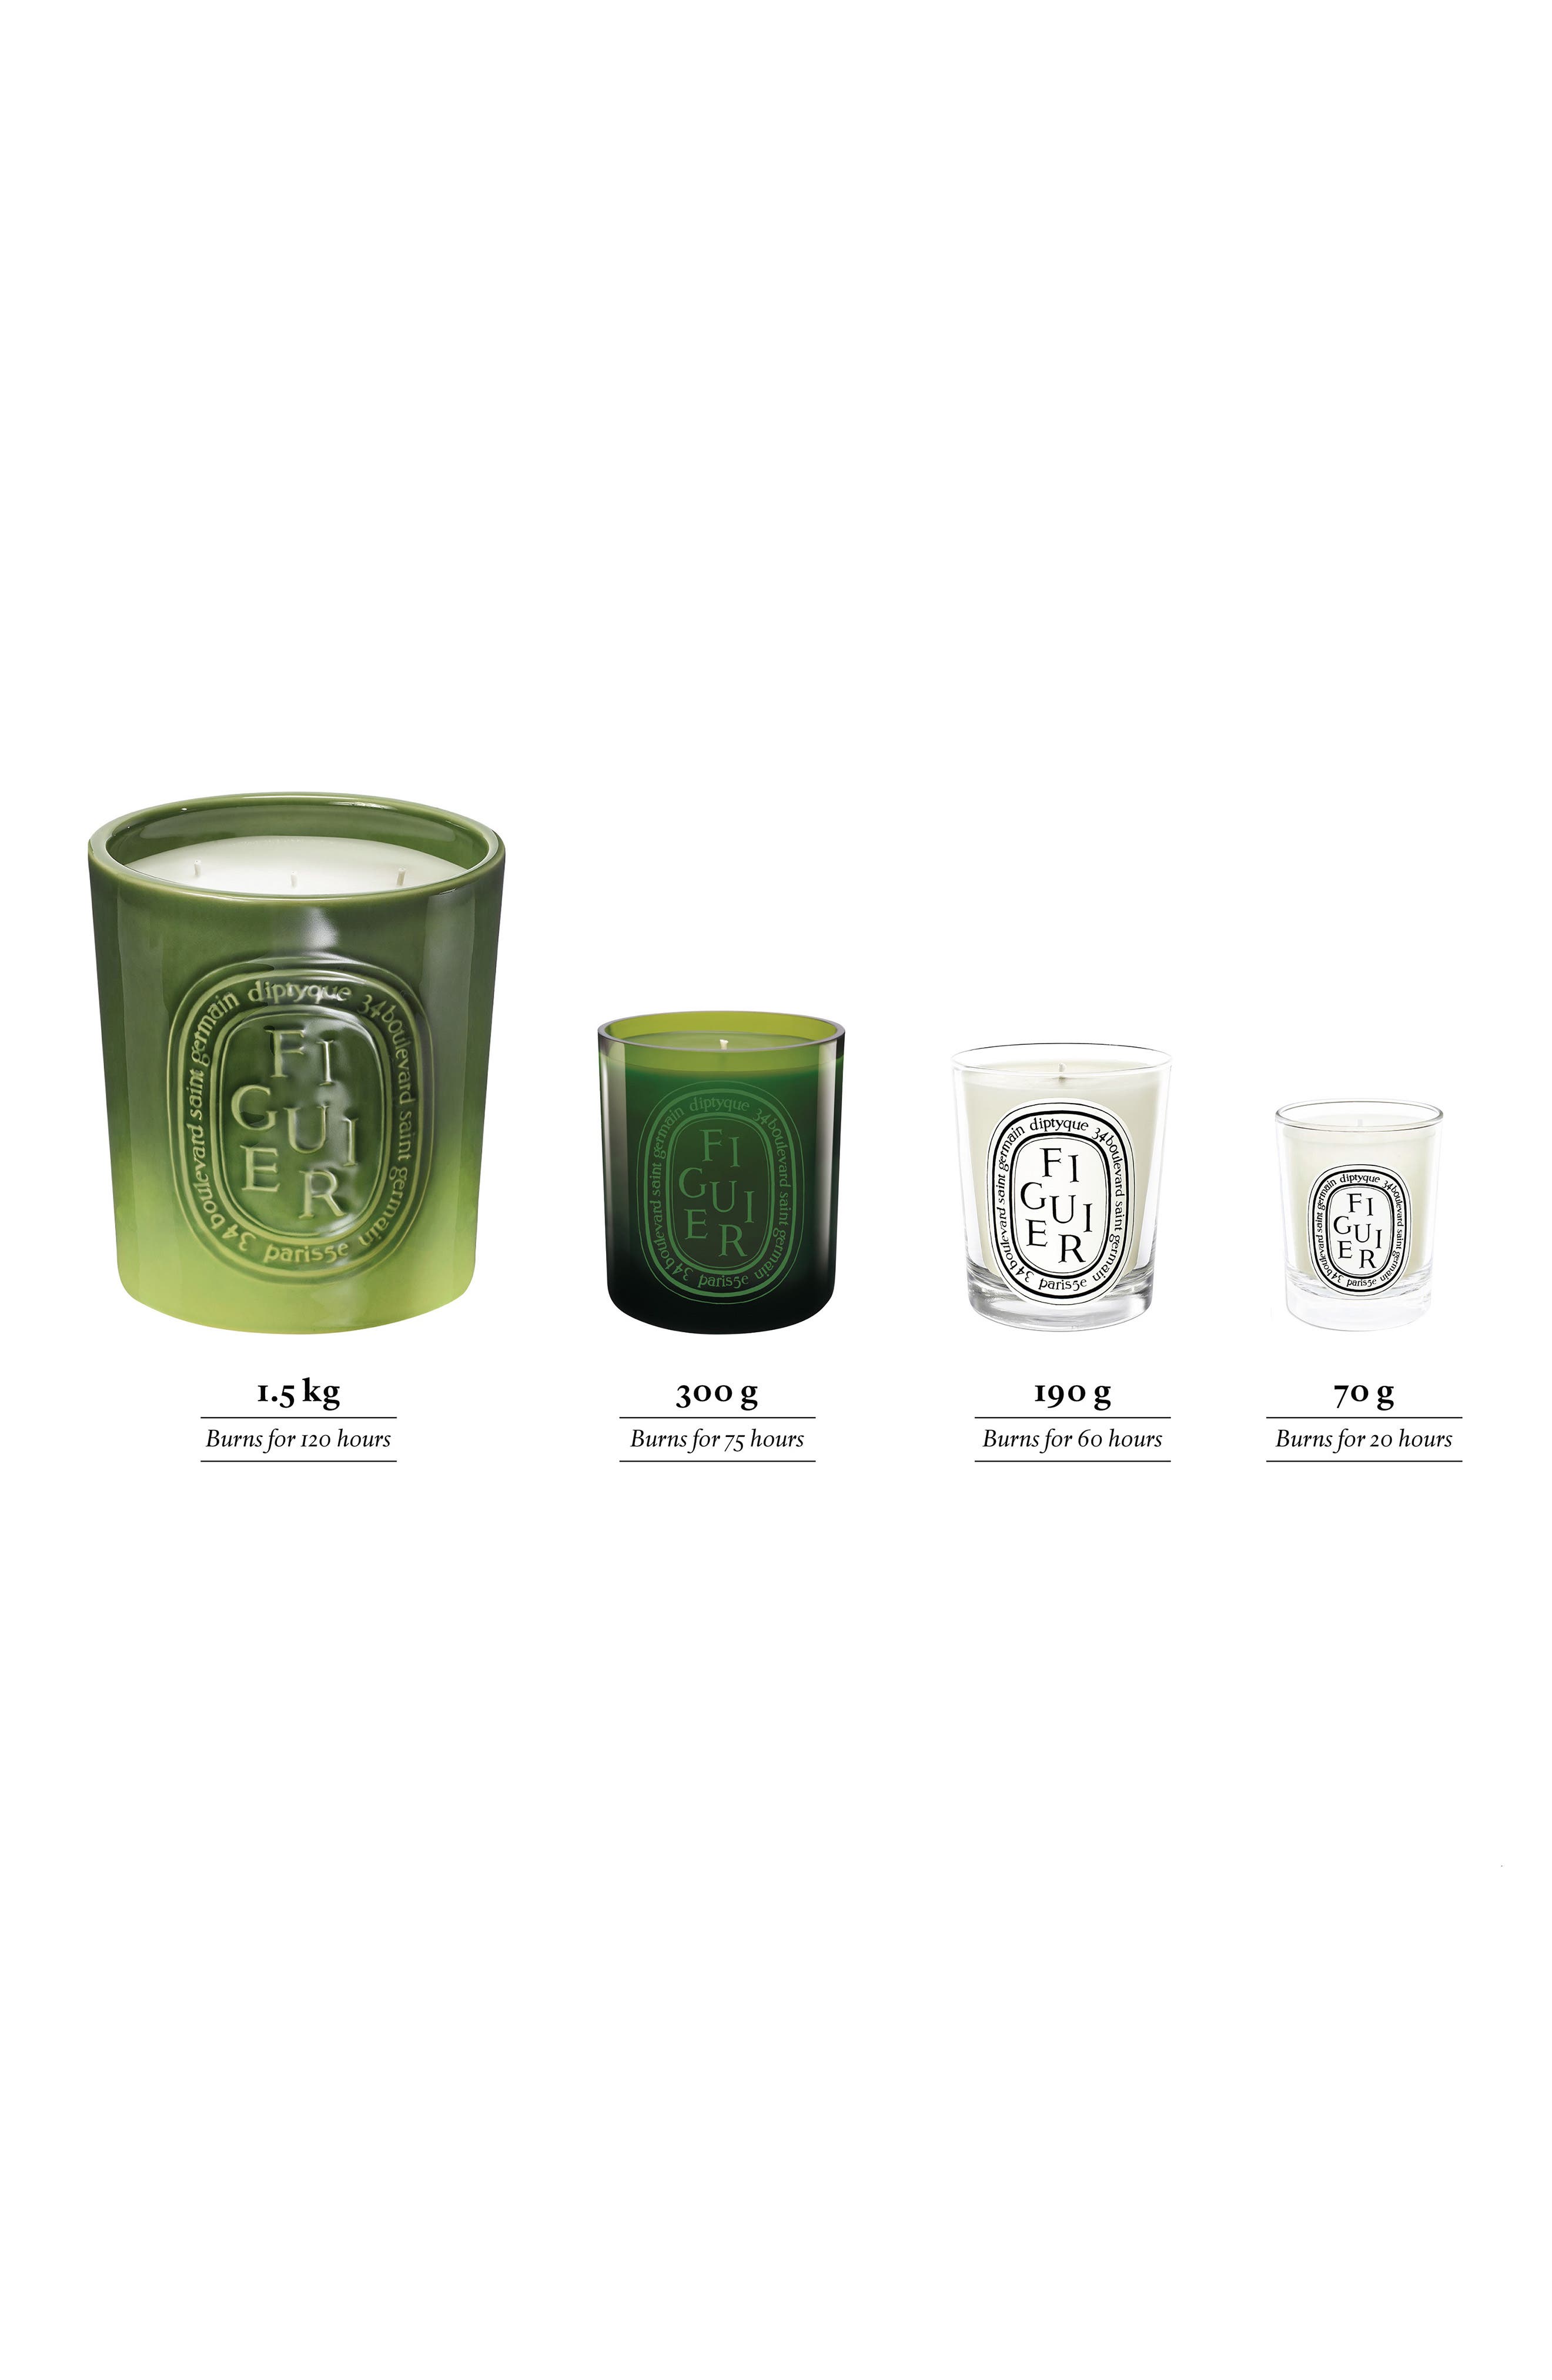 Details about   Diptyque Figuier Candle Open BOX WAX ONLY 